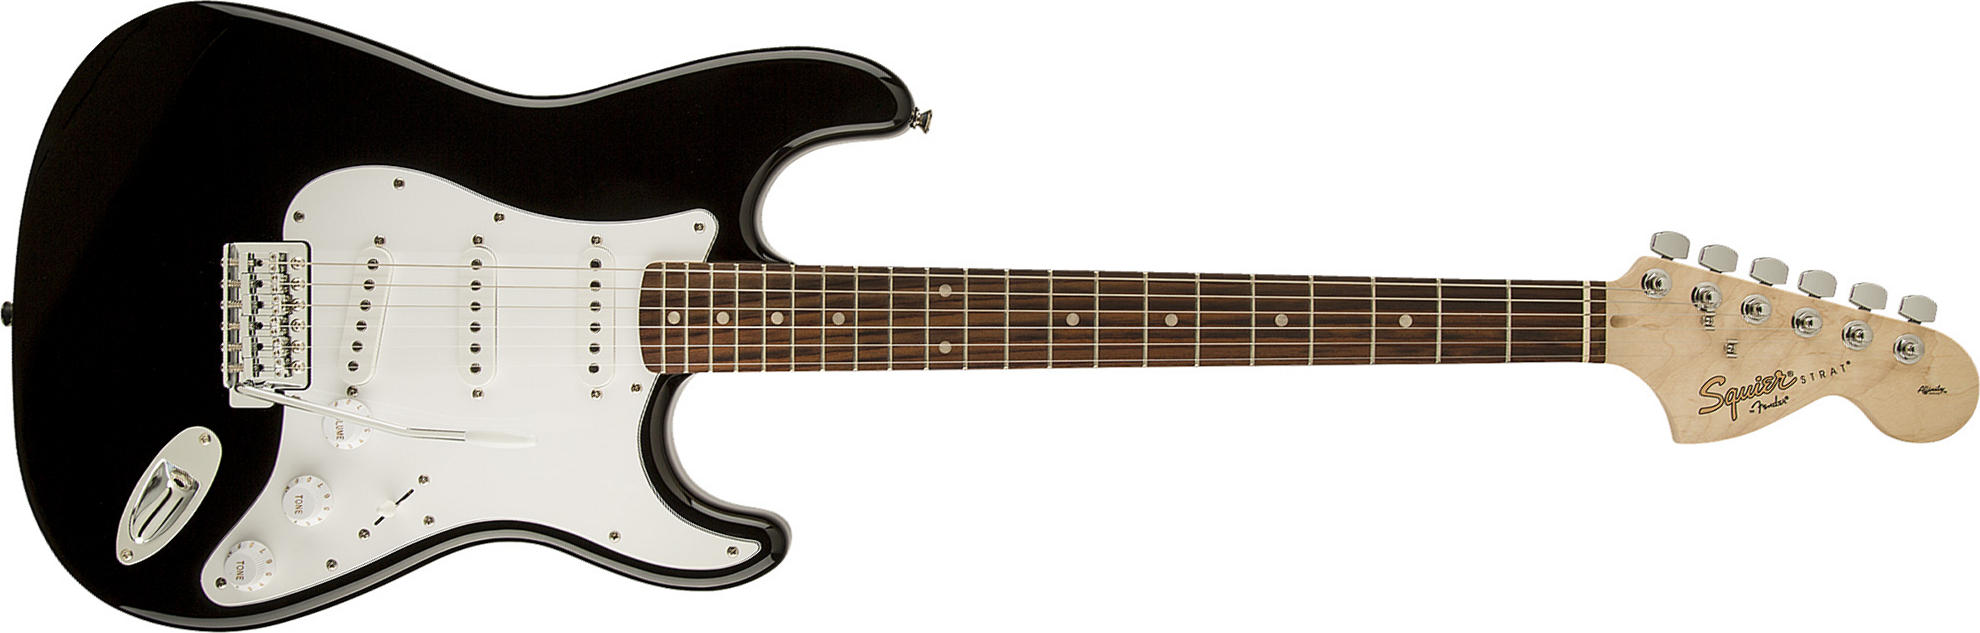 Squier Strat Affinity Series 3s Rw - Black - E-Gitarre in Str-Form - Main picture